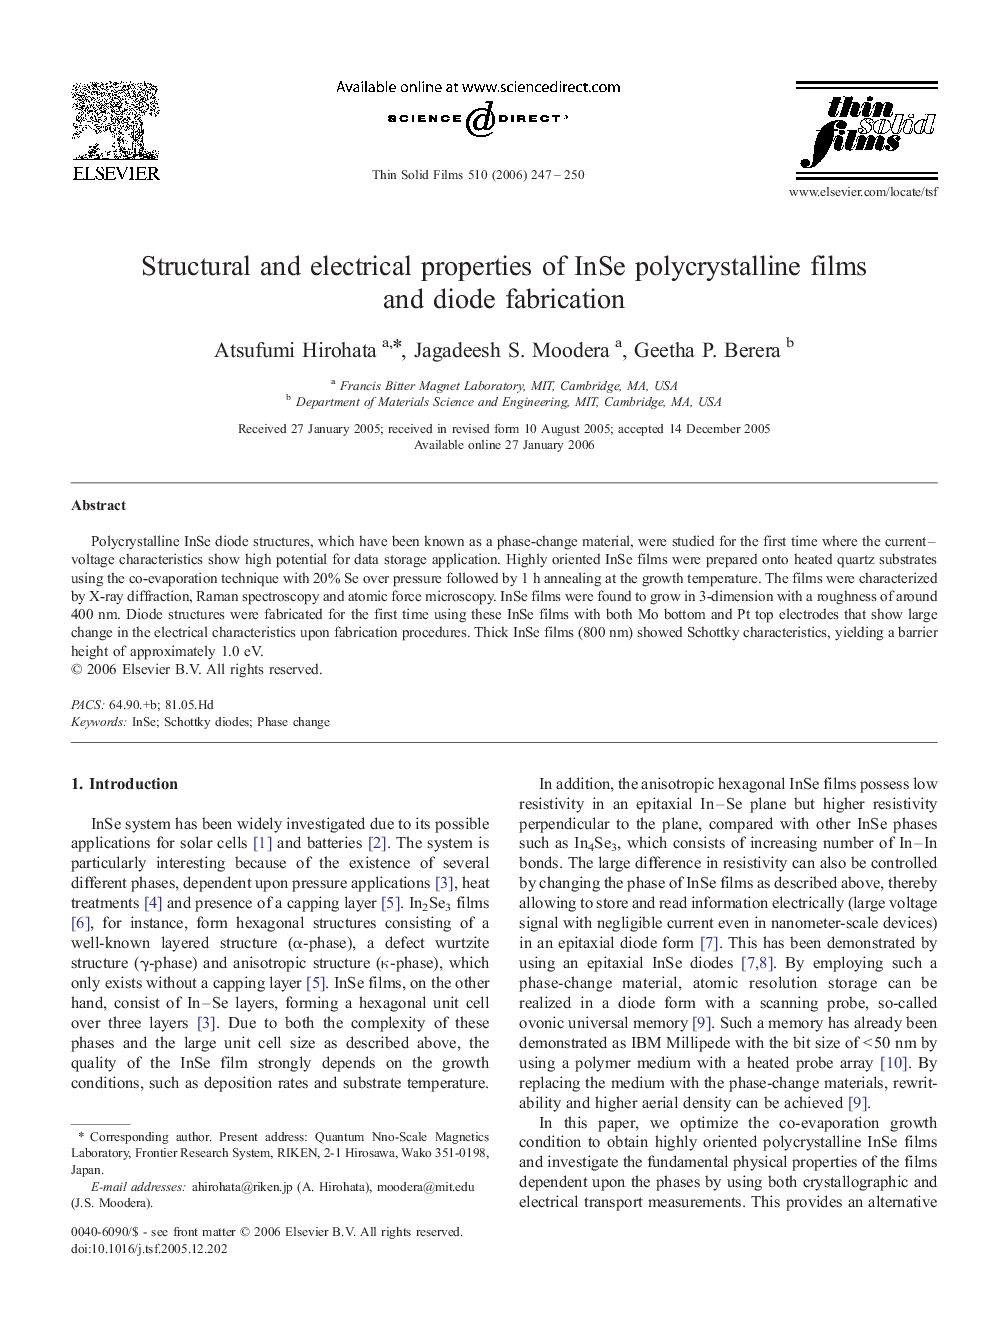 Structural and electrical properties of InSe polycrystalline films and diode fabrication